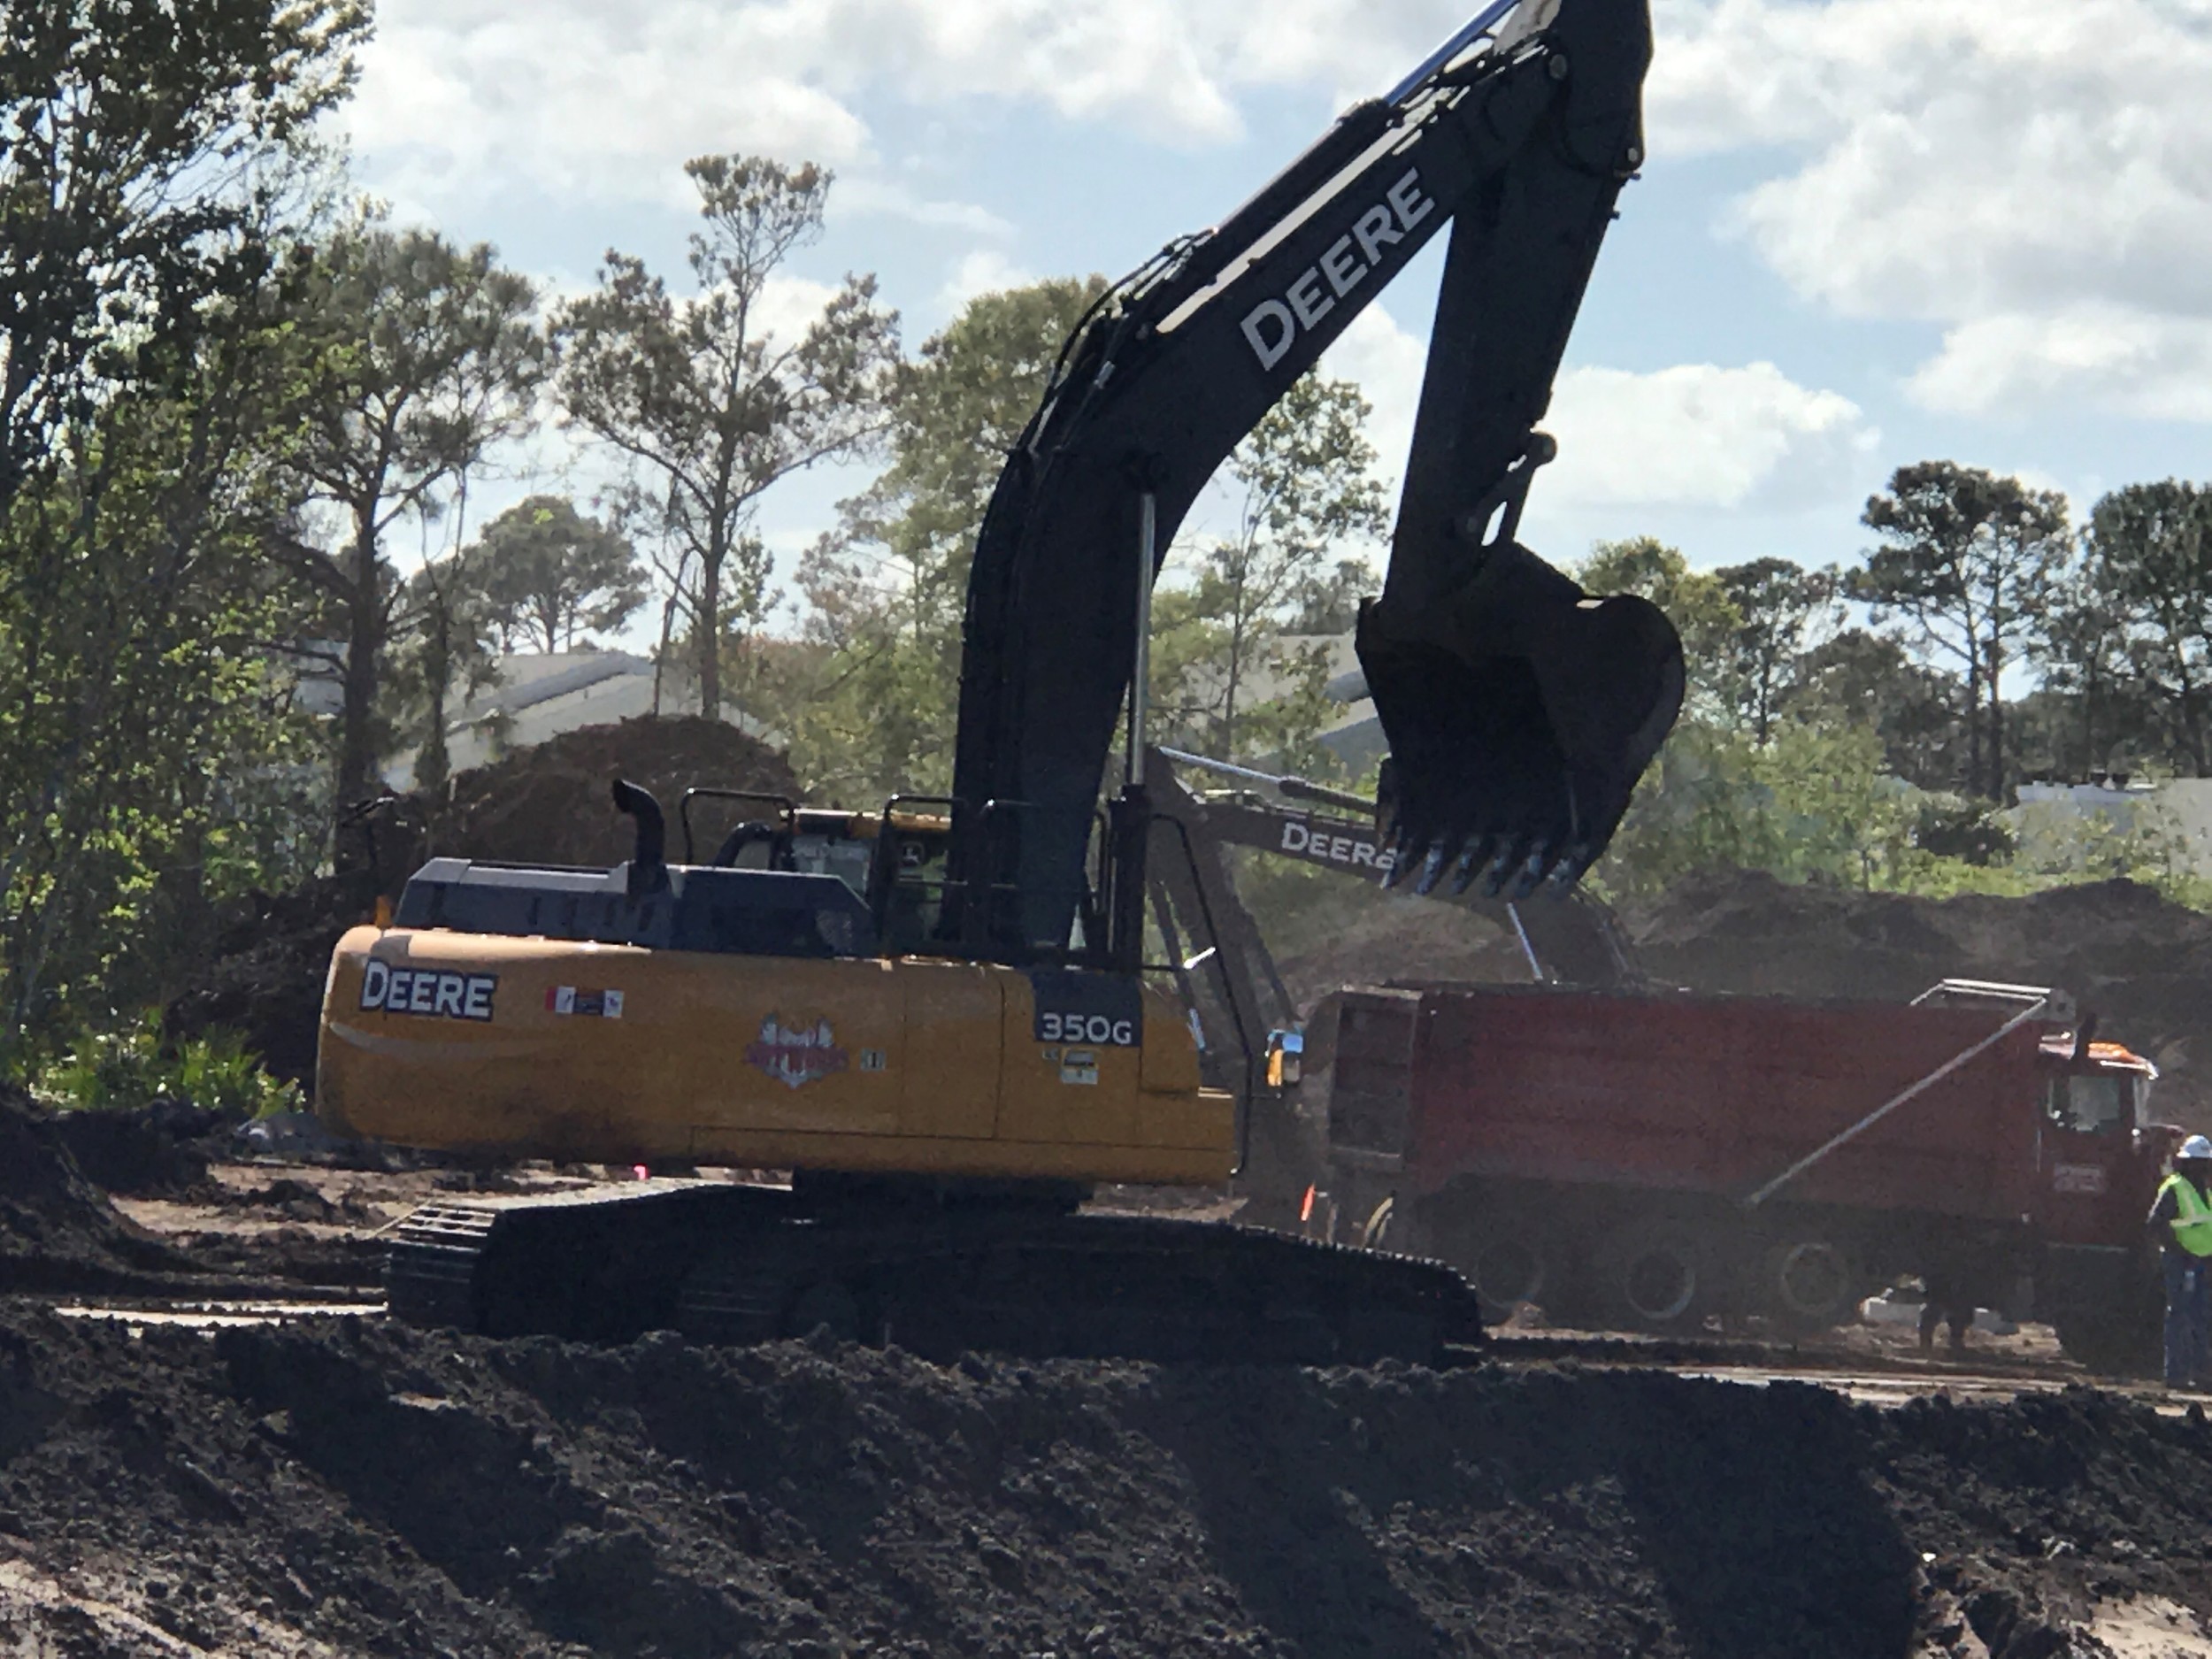 Dream Finders continues construction on a 21-home subdivision adjacent to the Innlet known as The Palms at Old Ponte Vedra.